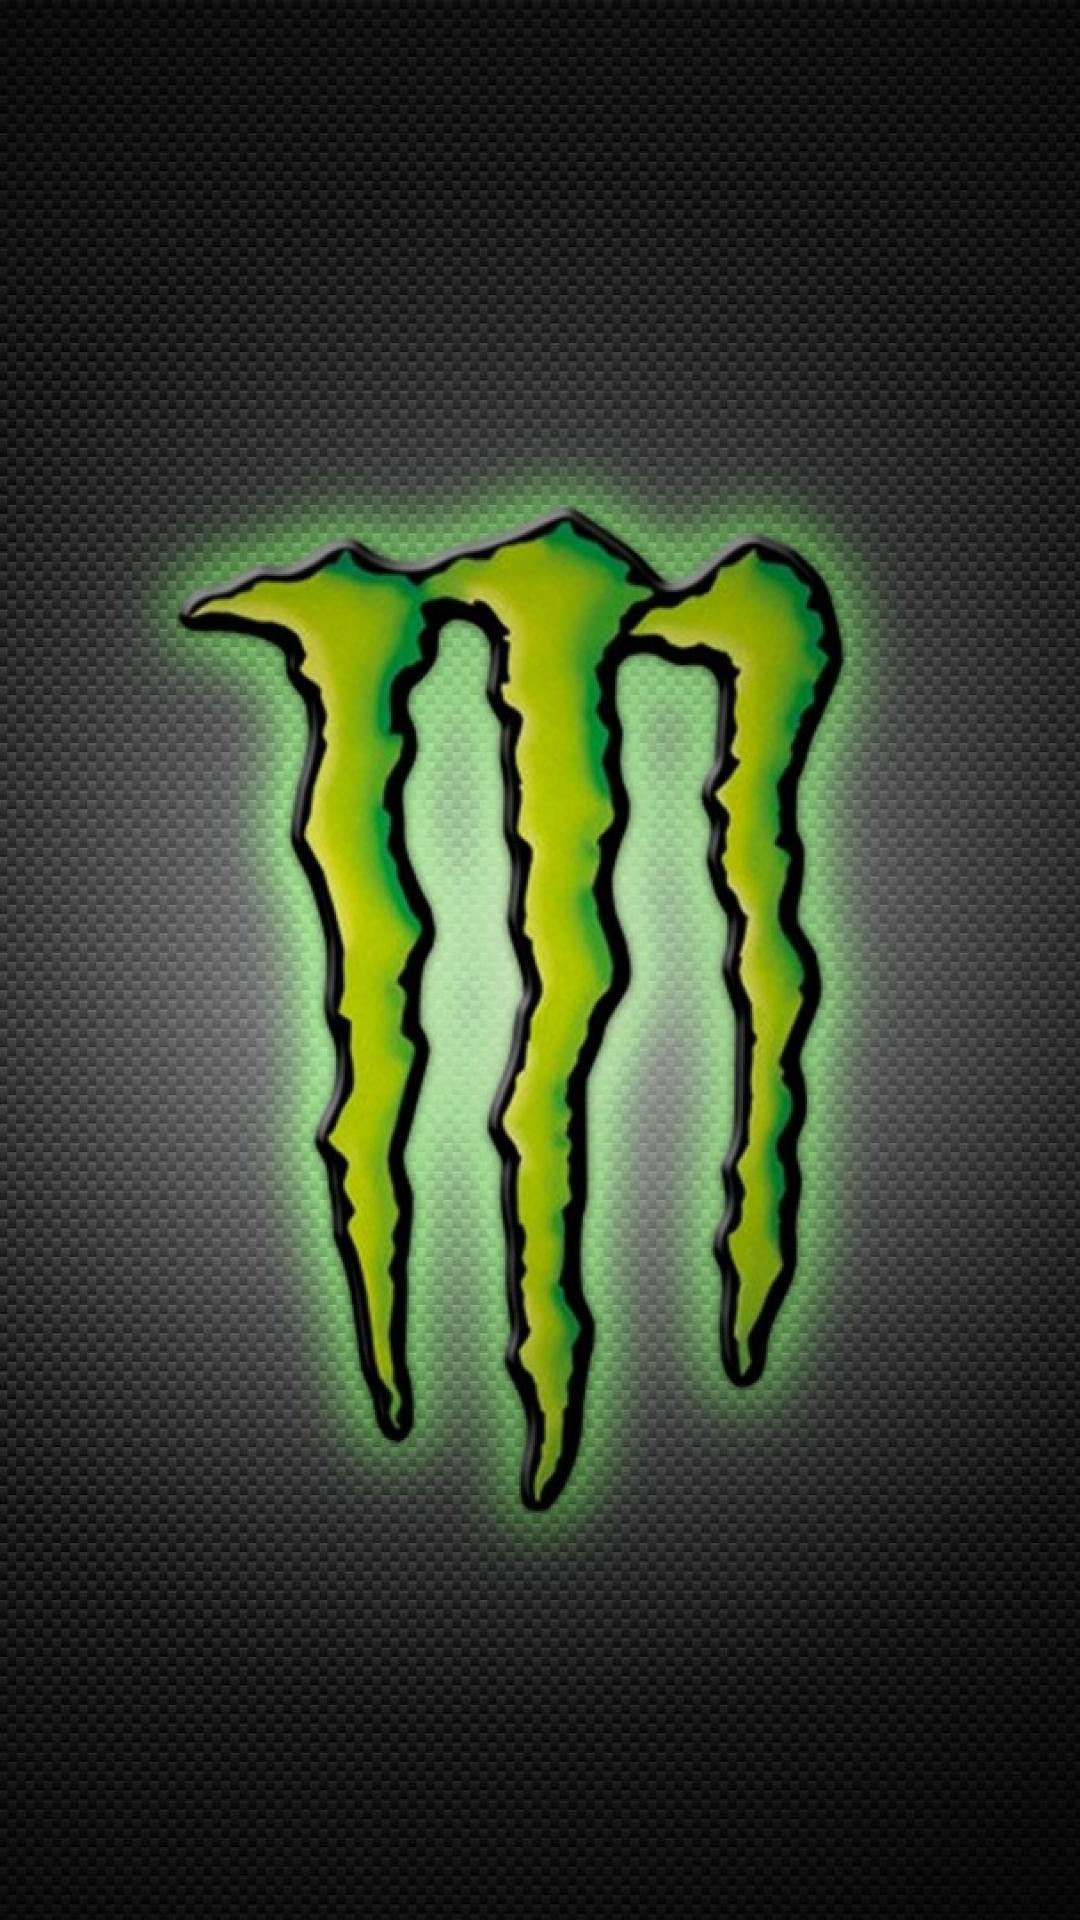 1080x1920 768x1024 Monster iPhone ...